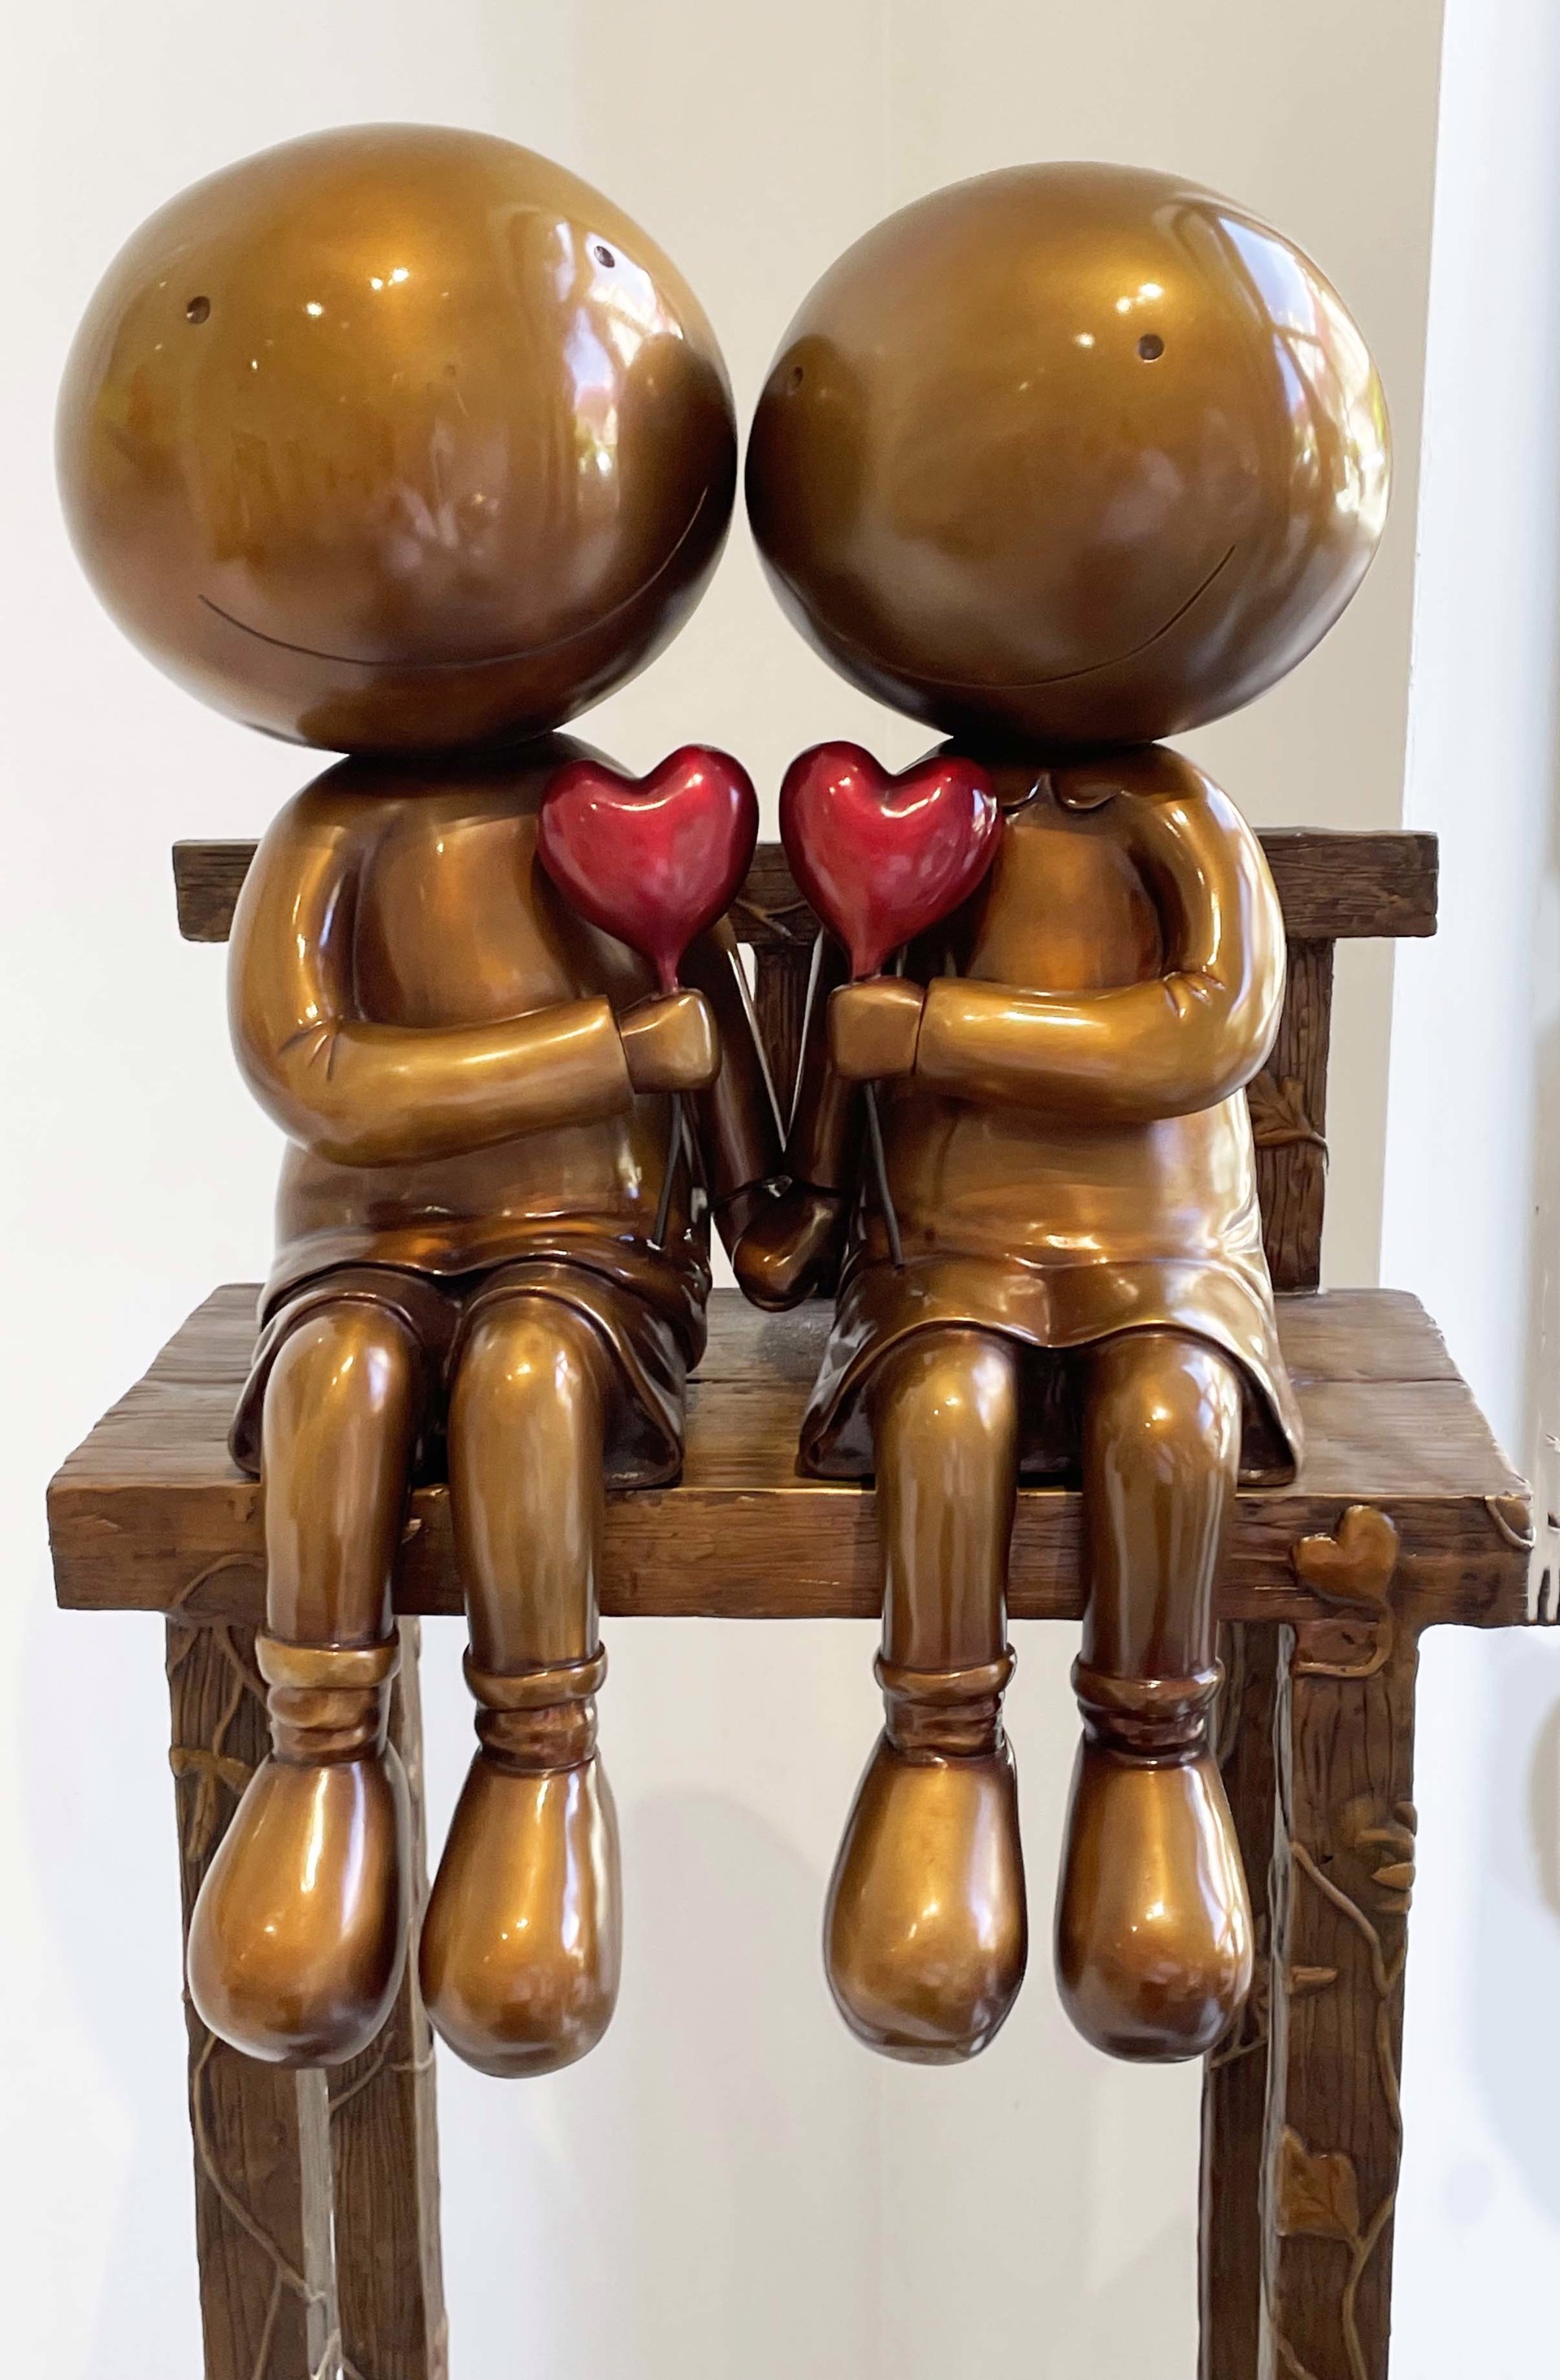 Lovers on the Bench by Mackenzie Thorpe - Sculpture